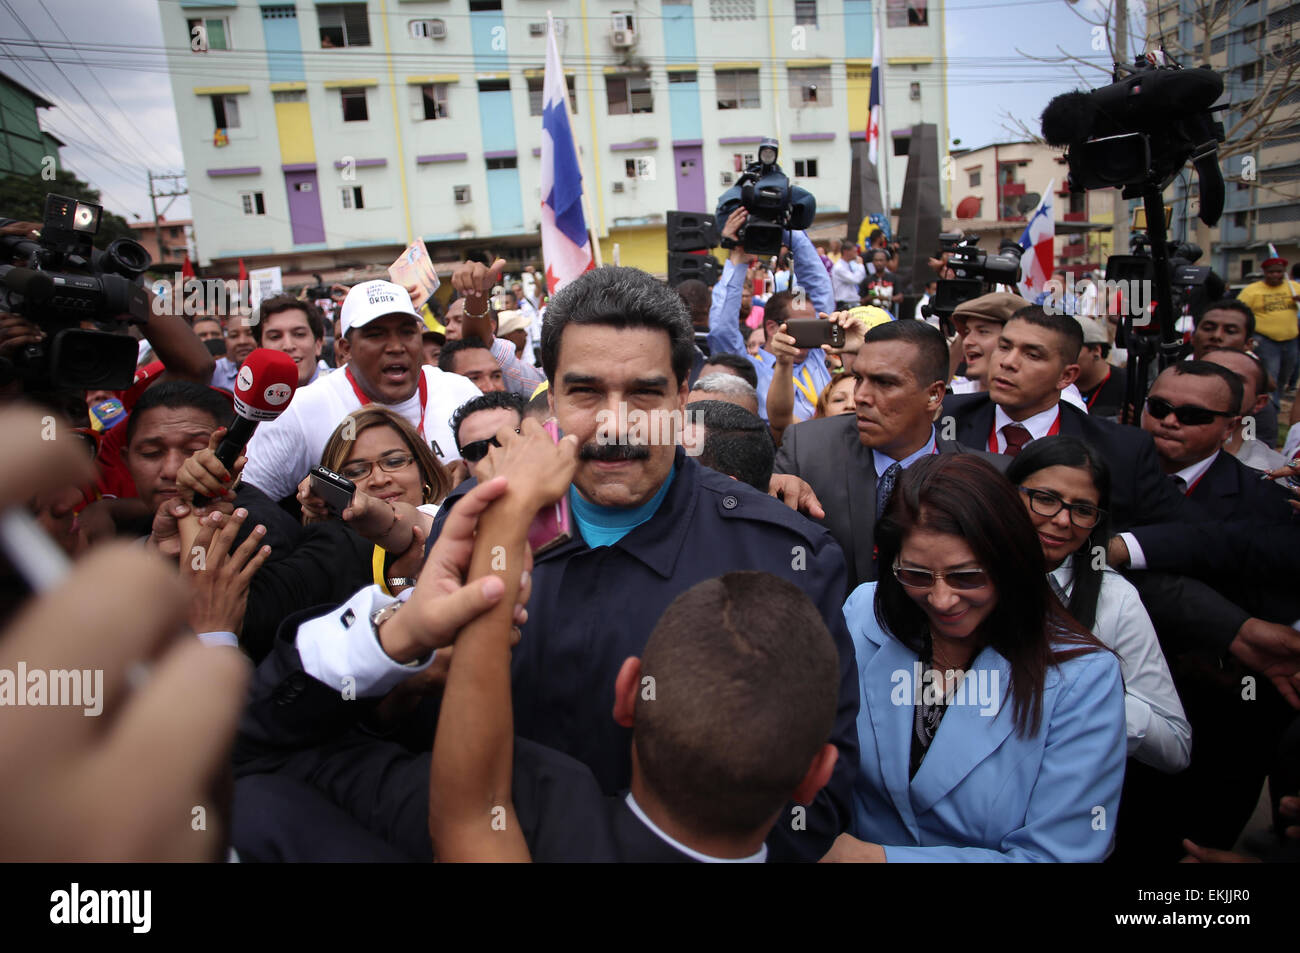 Panama City, Panama. 10th Apr, 2015. Venezuelan President Nicolas Maduro (C) attends a tribute to civilians killed in the US military action against Panama in the neighborhood of El Chorrillo, in Panama City, capital of Panama, on April 10, 2015. Nicolas Maduro is in Panama to attend the 7th Summit of the Americas held from April 10 to 11. © Mauricio Valenzuela/Xinhua/Alamy Live News Stock Photo